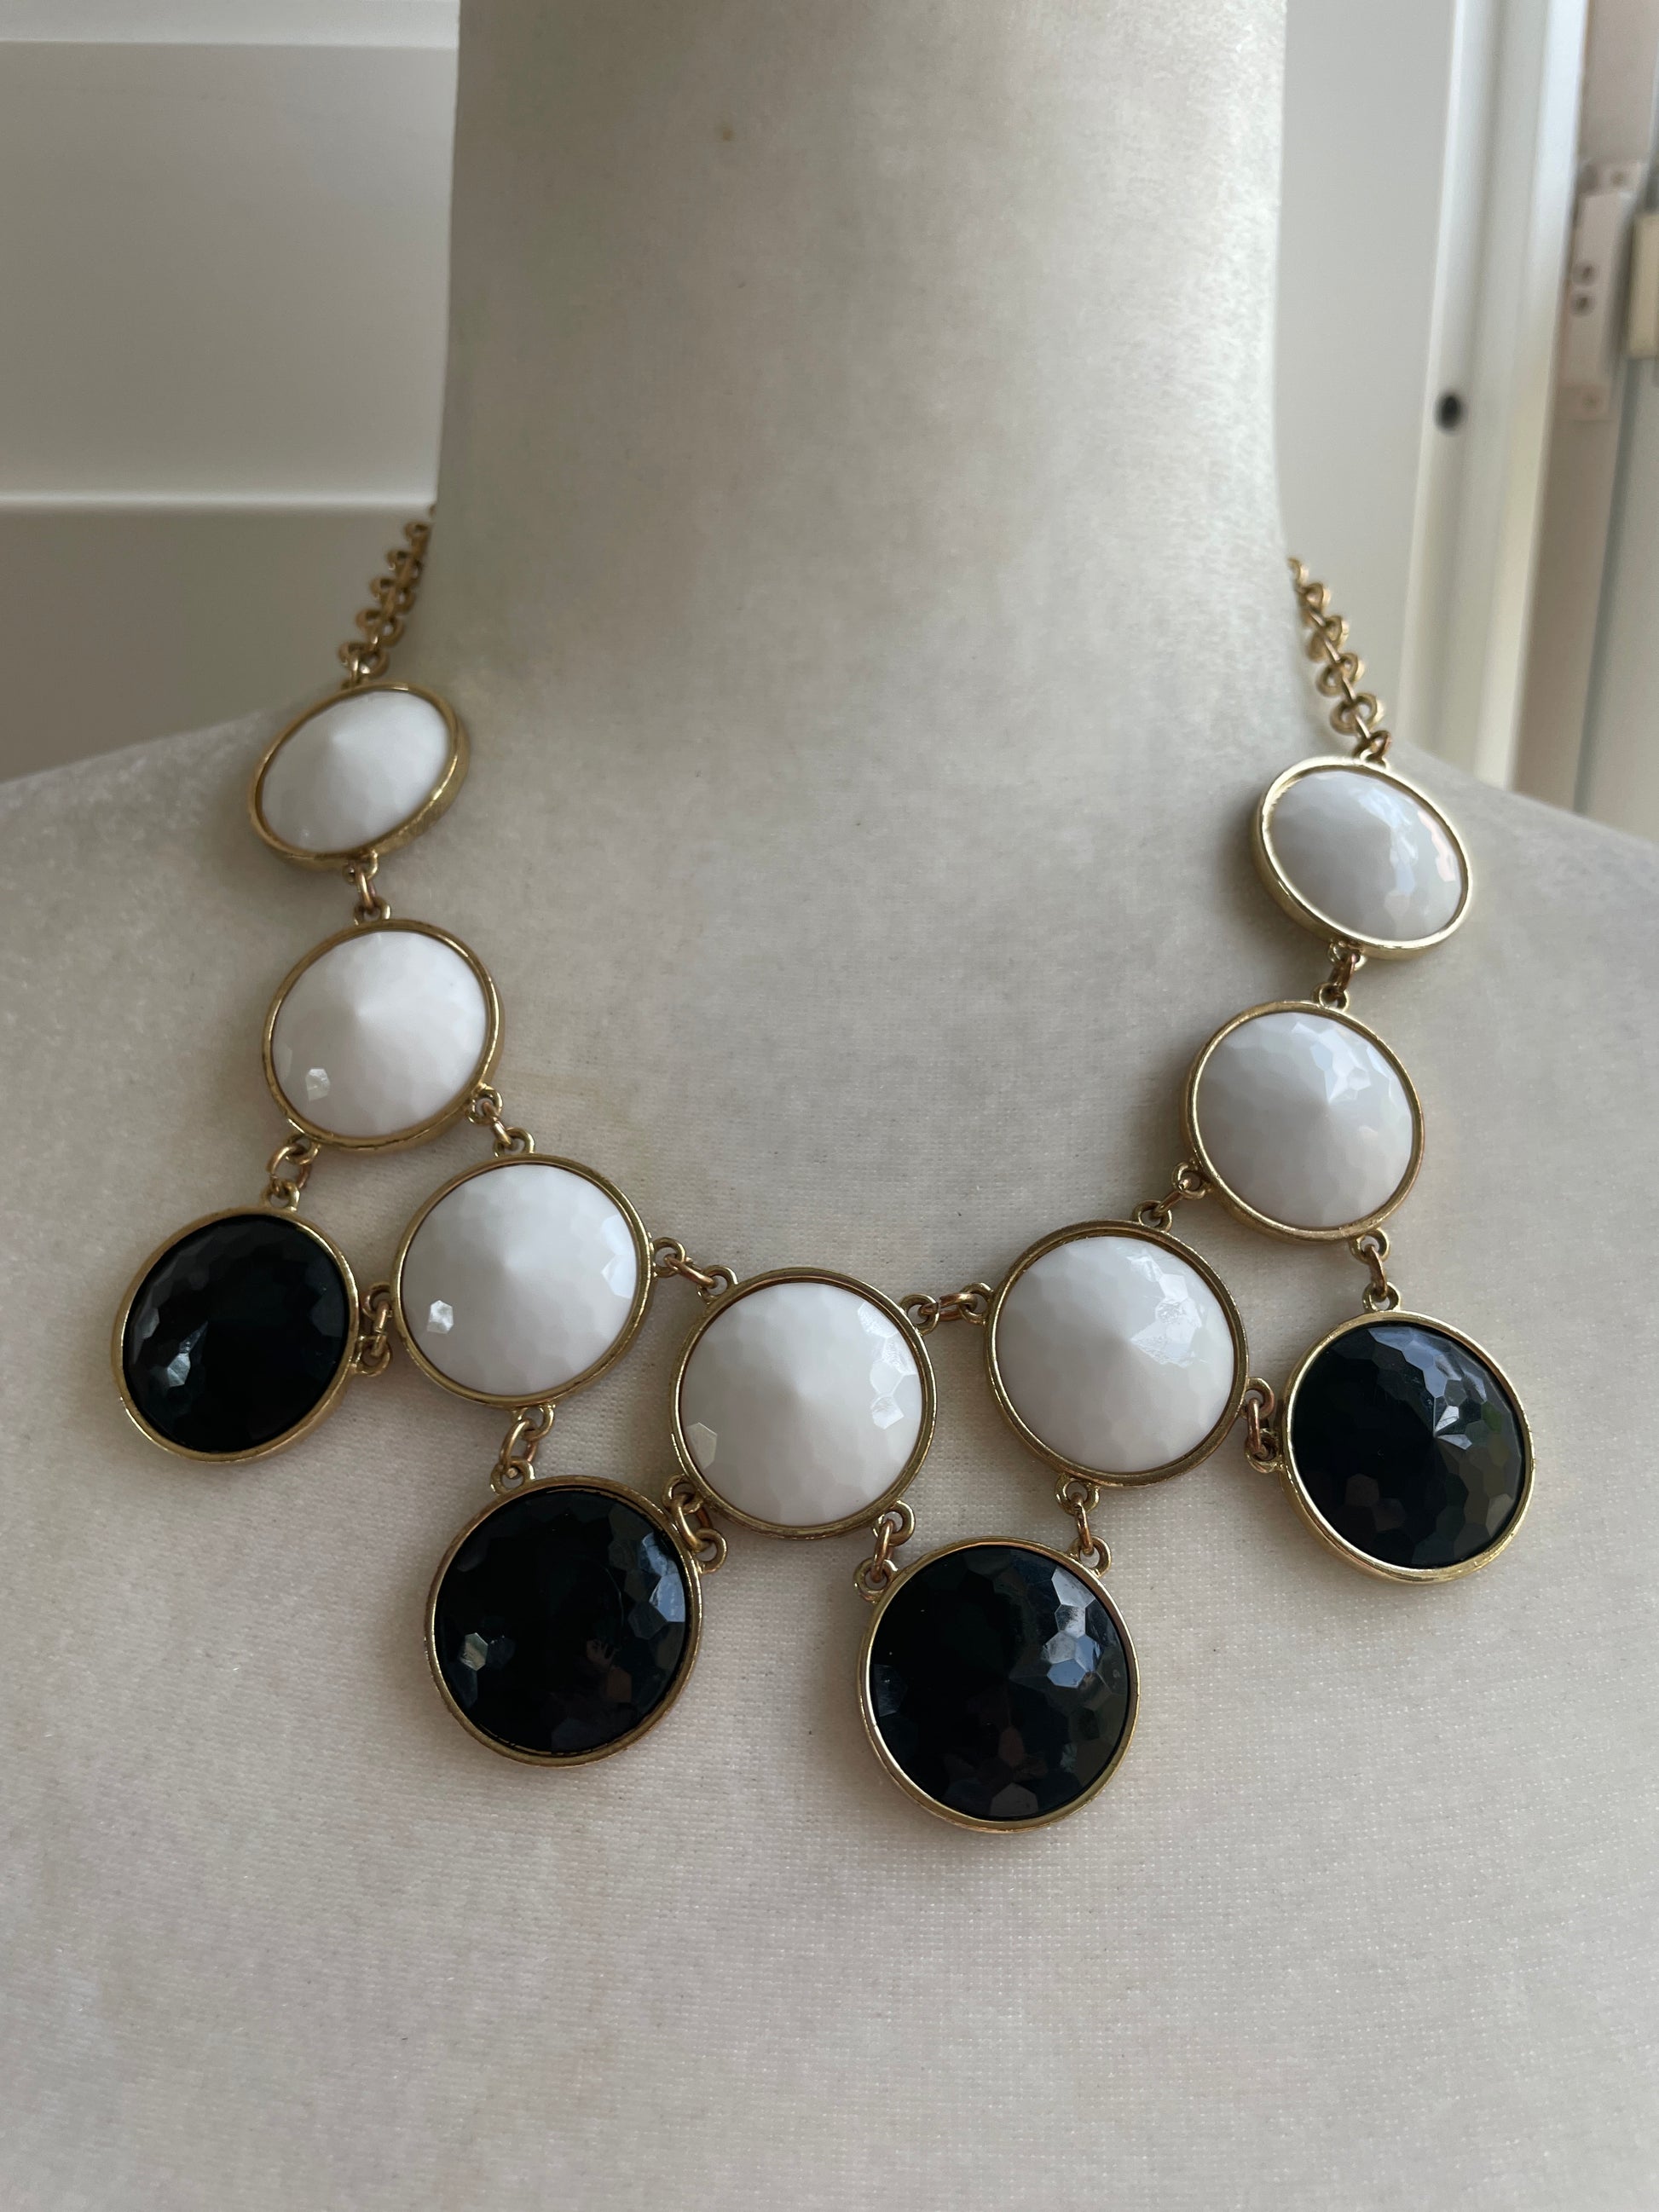 Cookie Lee bib necklace  90s Signed Cookie Lee Gold Tone Black White Cabochon Bib Necklace